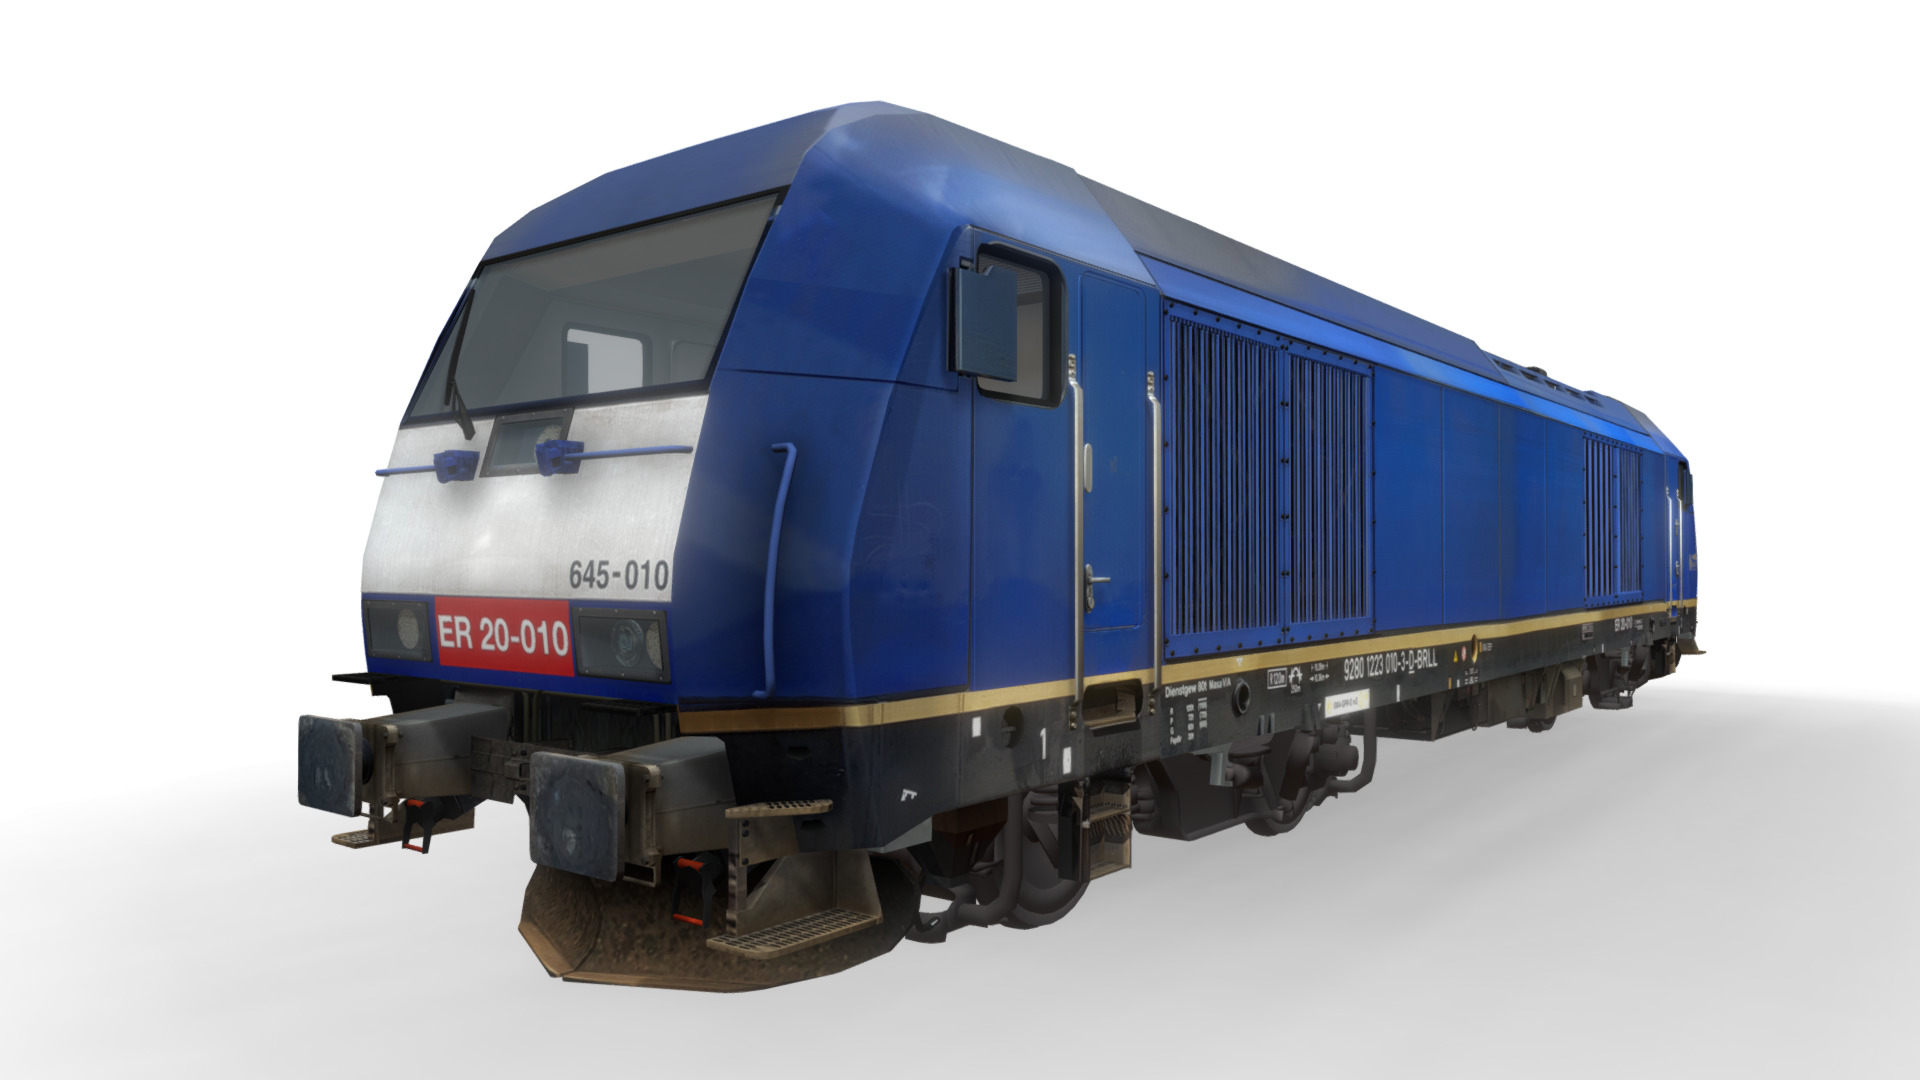 3D model Locomotive Class 223 – ER20-010 – BRLL - This is a 3D model of the Locomotive Class 223 - ER20-010 - BRLL. The 3D model is about a blue train on a white background.